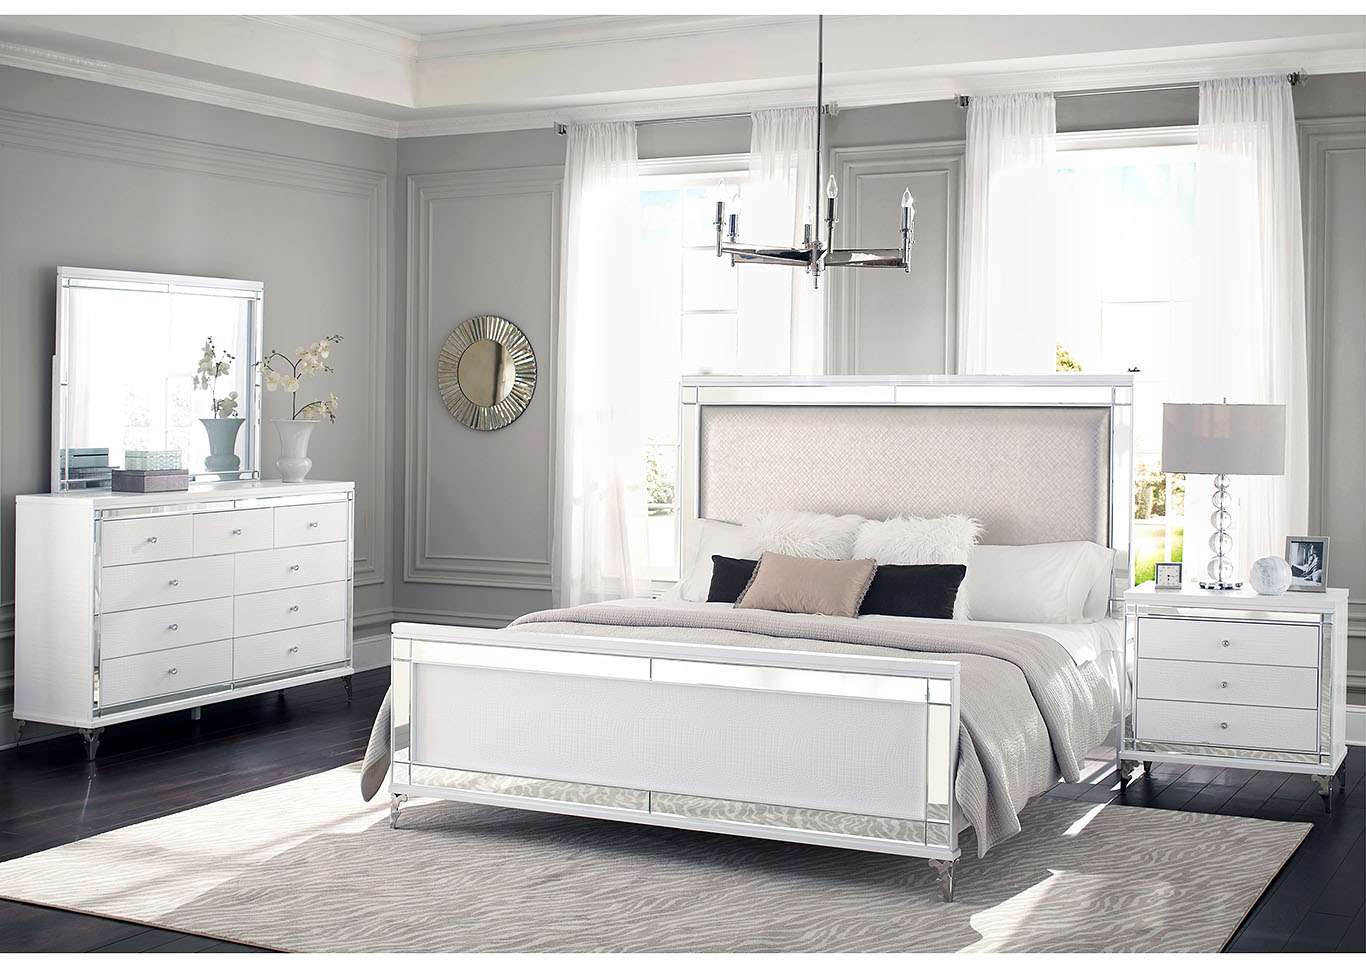 Catalina Metallic White Upholstered Queen Panel Bed,Global Furniture USA